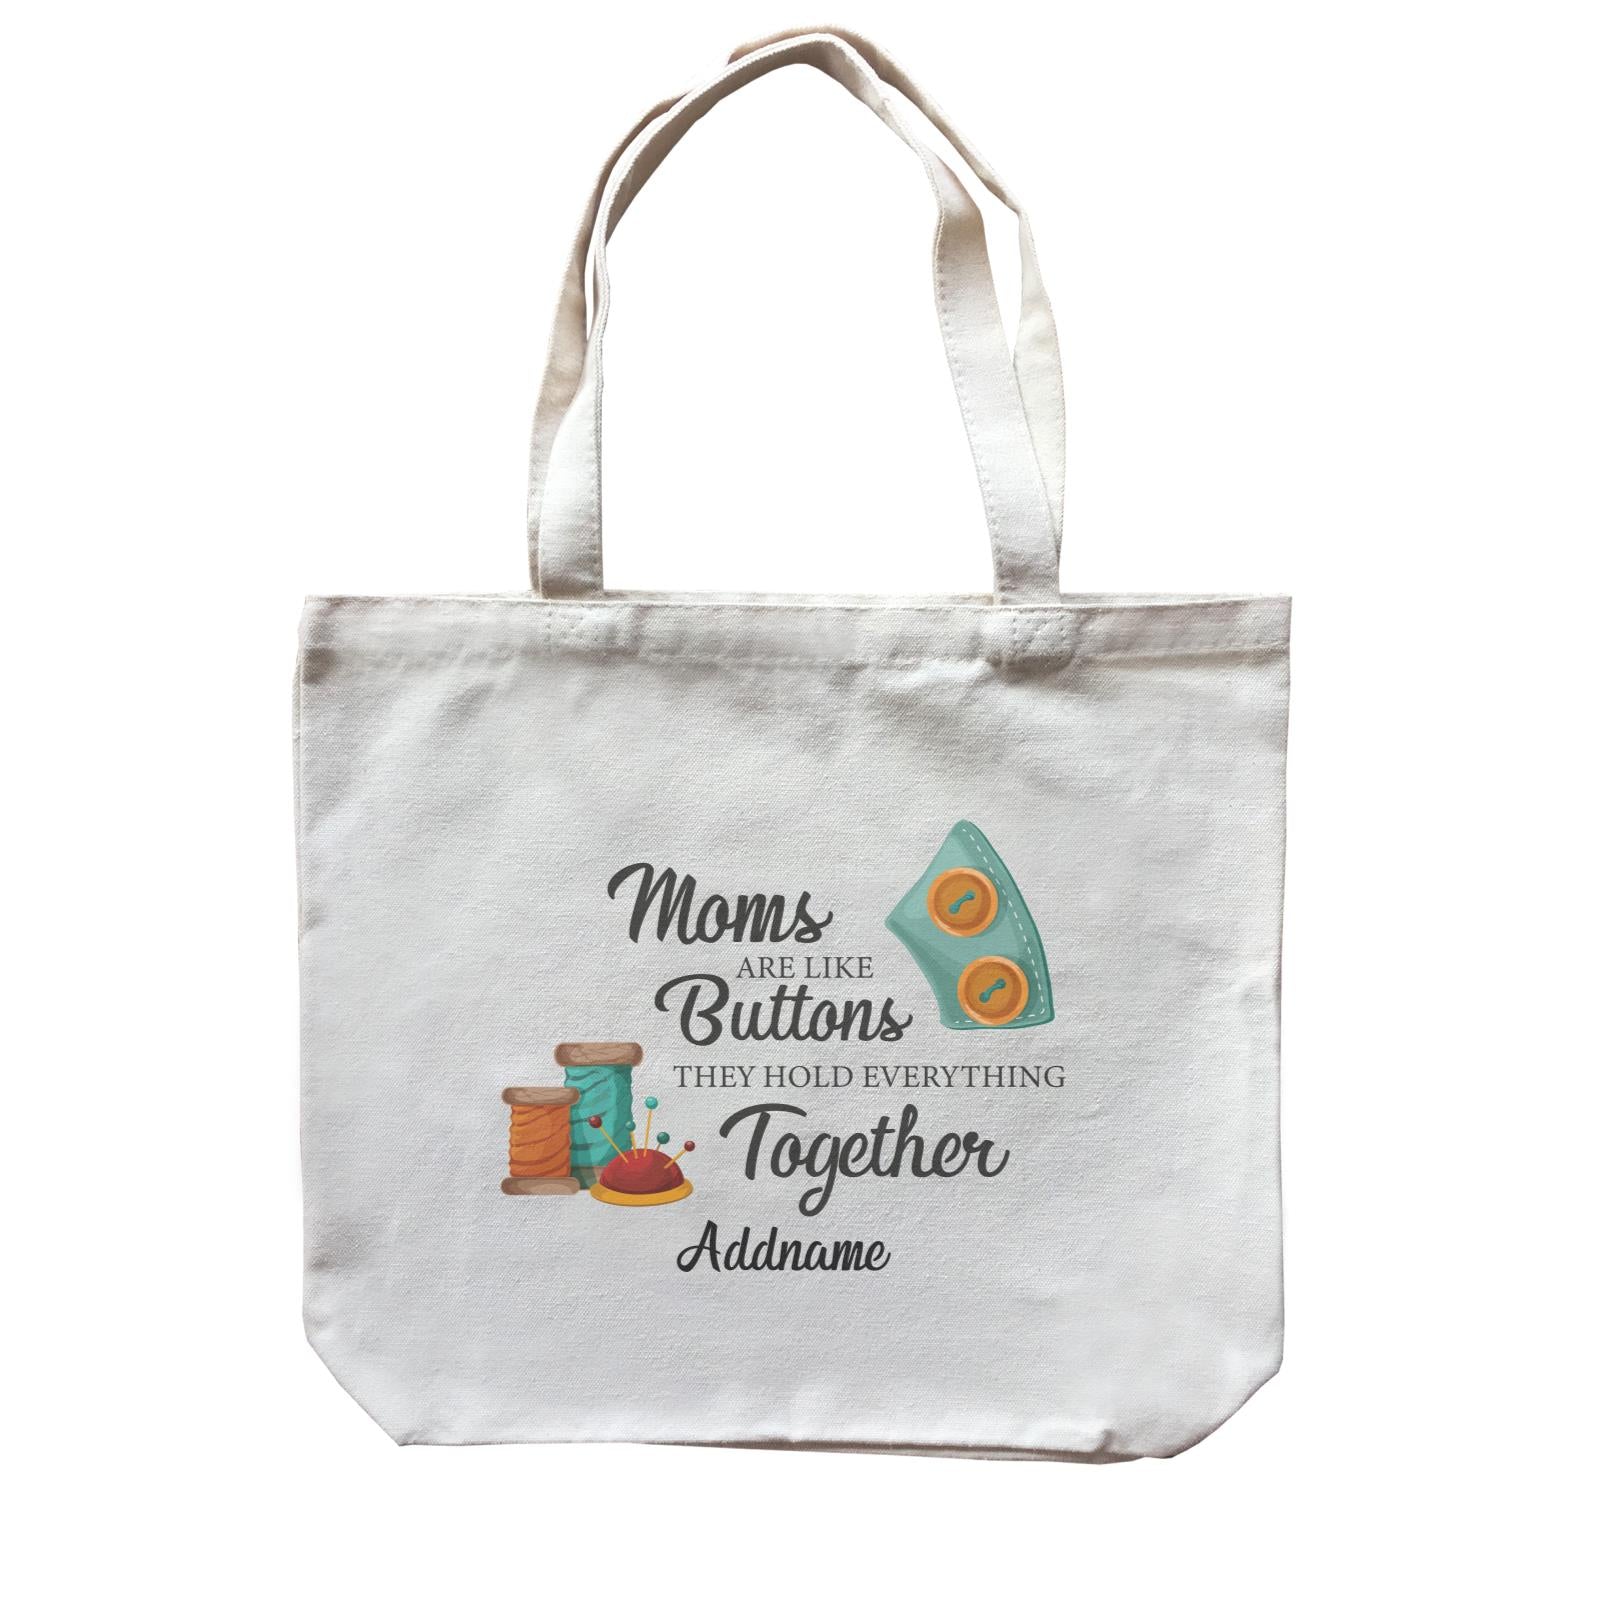 Sweet Mom Quotes 2 Moms Are Like Buttons They Hold Everything Together Addname Accessories Canvas Bag